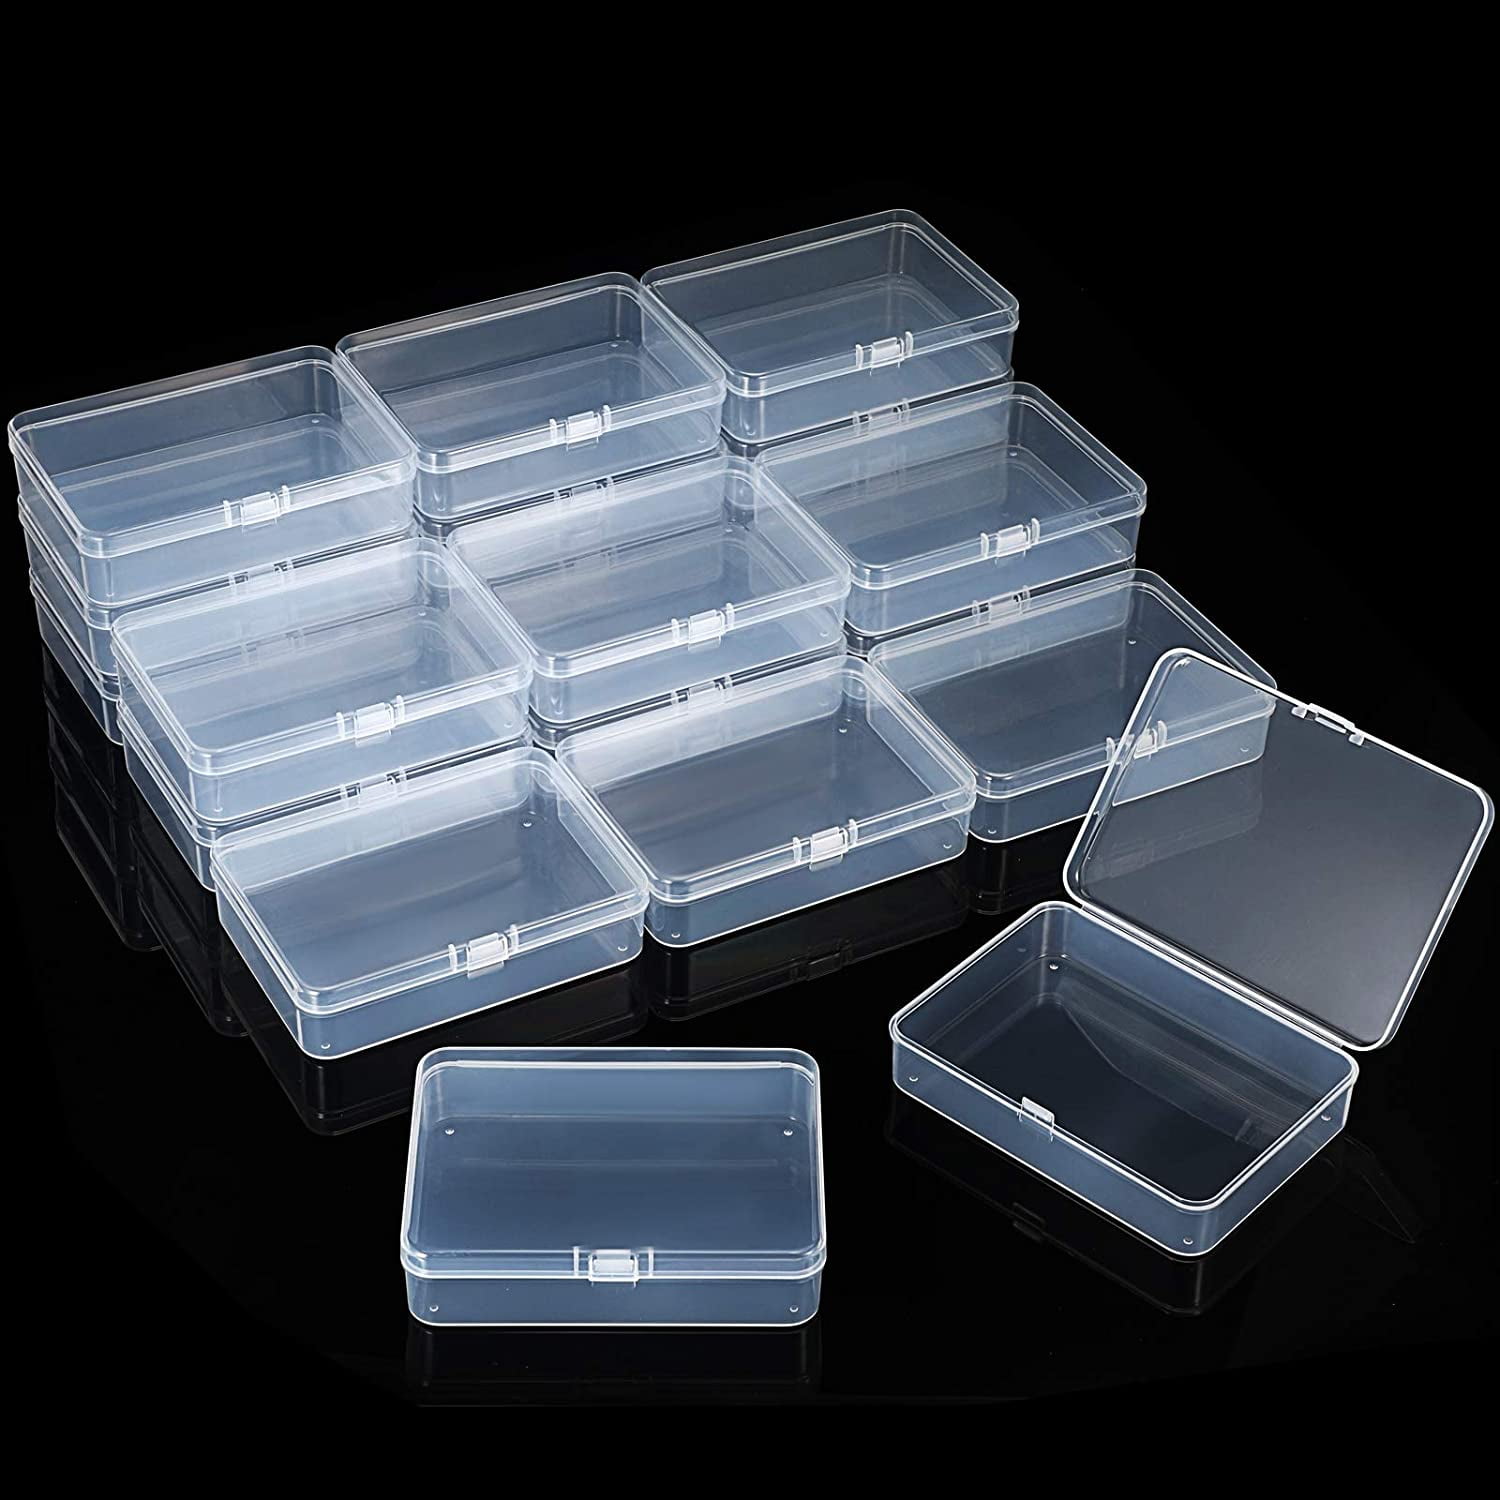 24 Pieces Small Clear Plastic Beads Storage Containers Storage Box with Hinged Lid for Storing Crafts Jewelry Business Cards Hardware Beads and More 